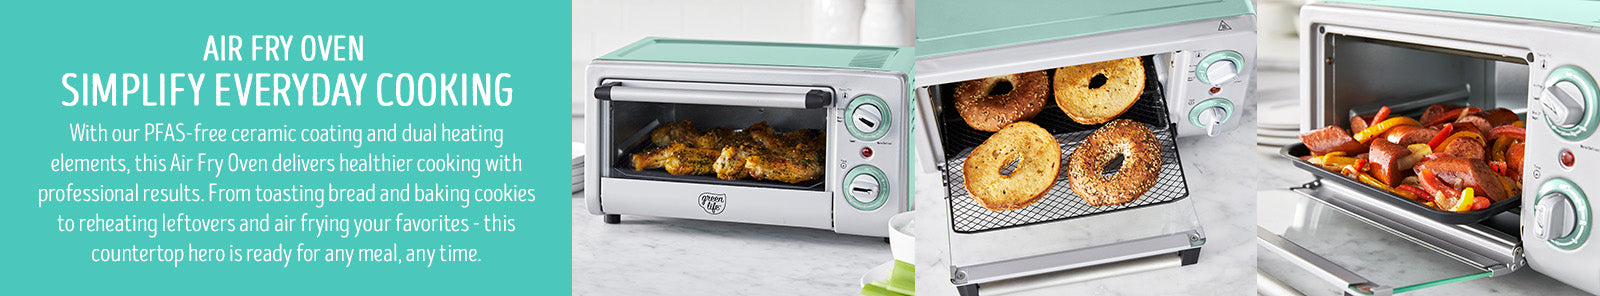 GreenLife Air Fry Oven, Turquoise